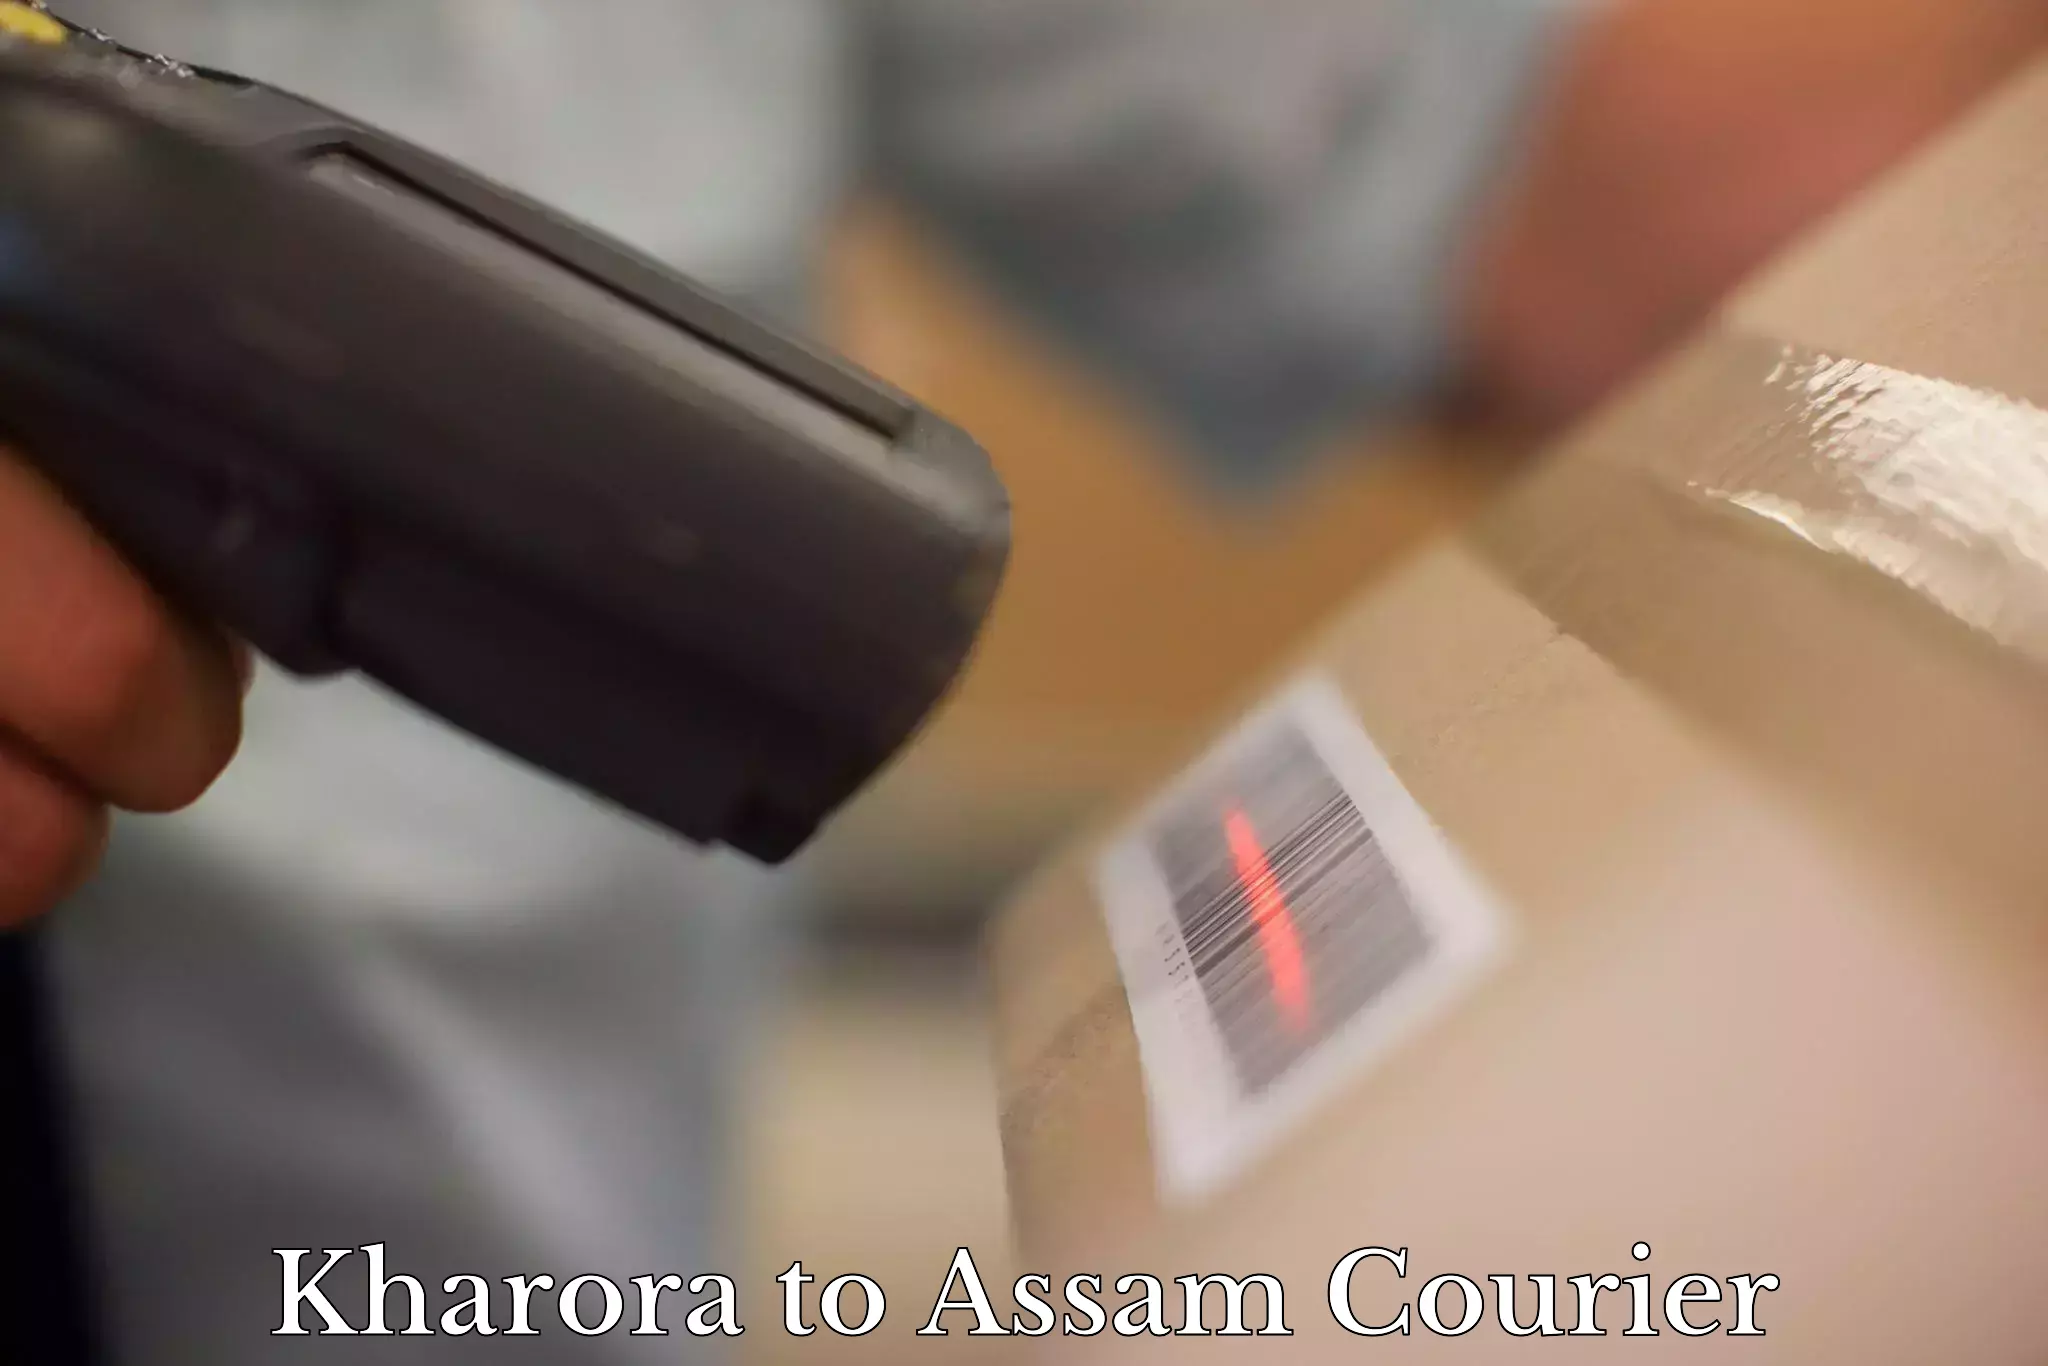 Efficient packing services in Kharora to Lala Assam